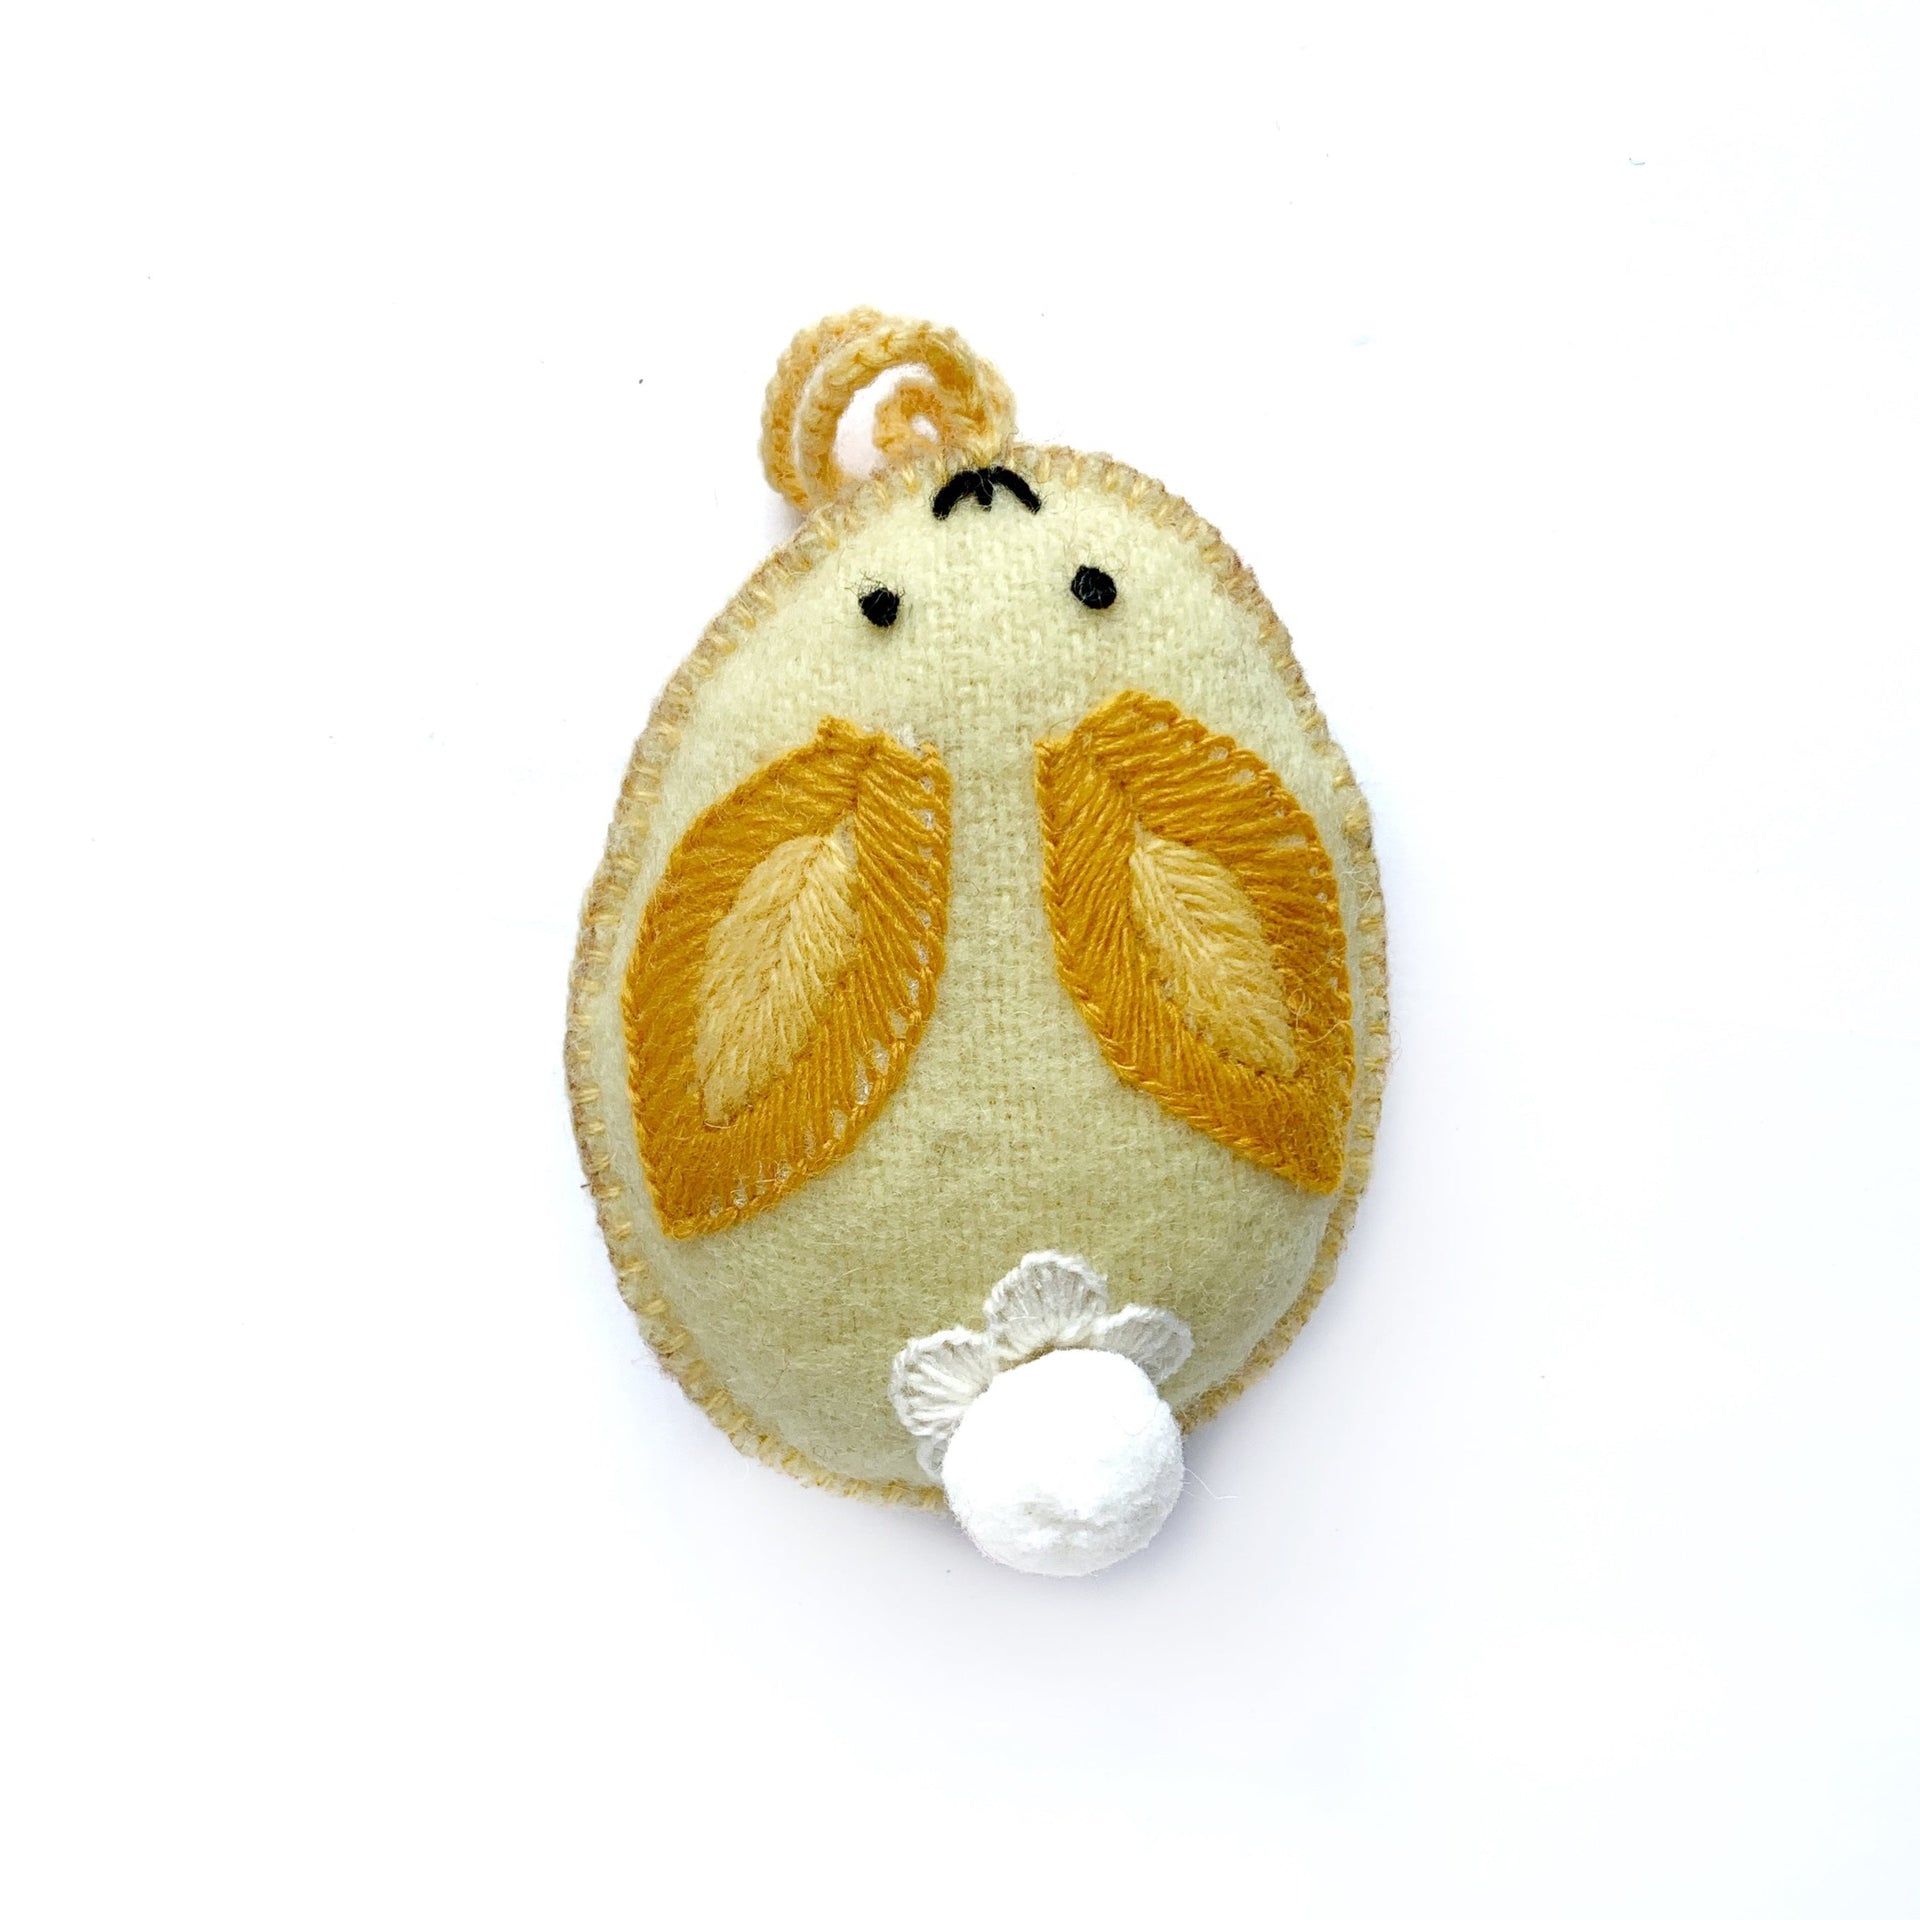 yellow bunny egg Easter ornament with pom pom tail.